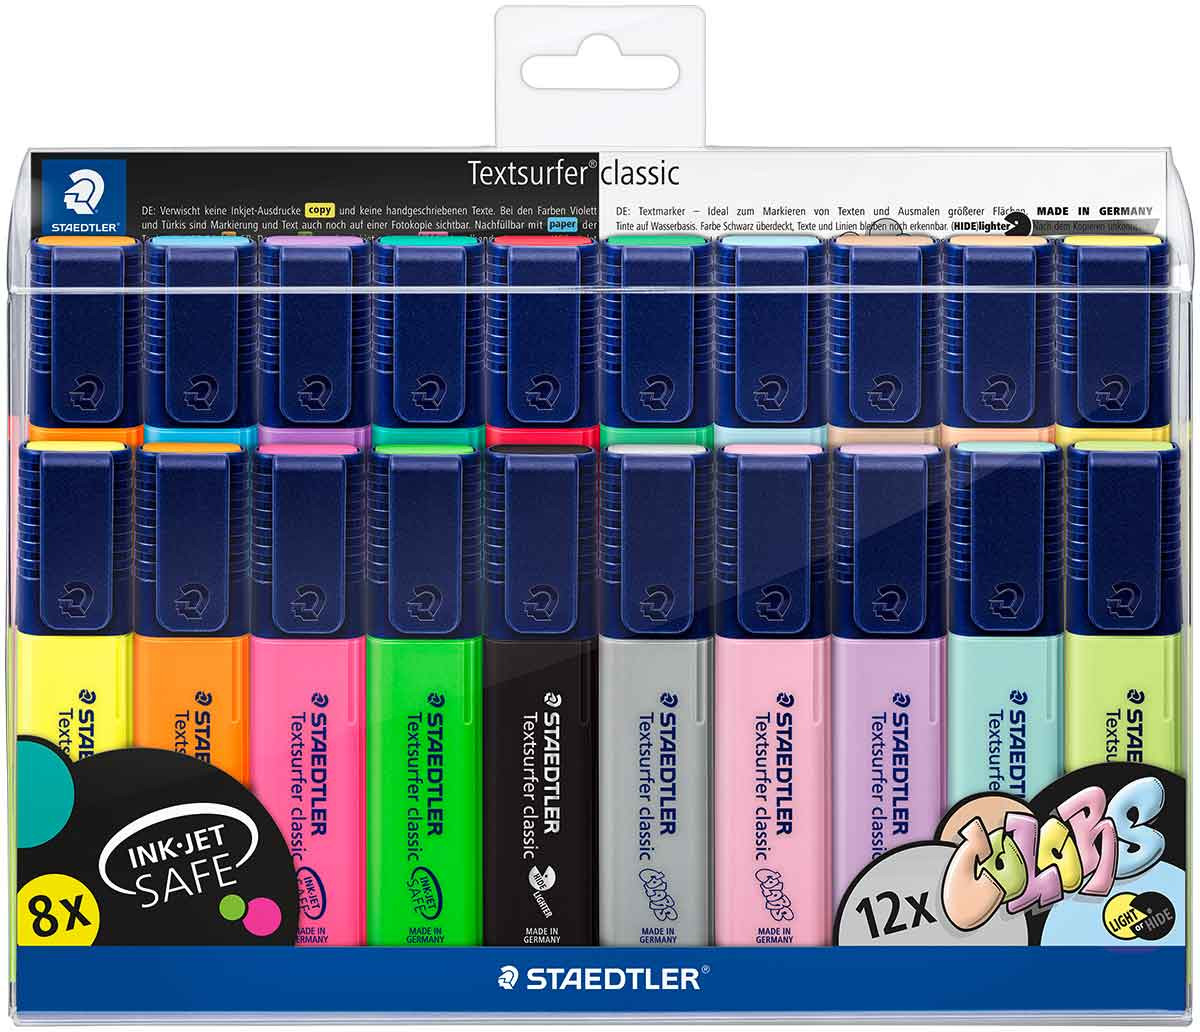 Staedtler Textsurfer Classic Highlighters - Assorted Colours (Wallet of 20)